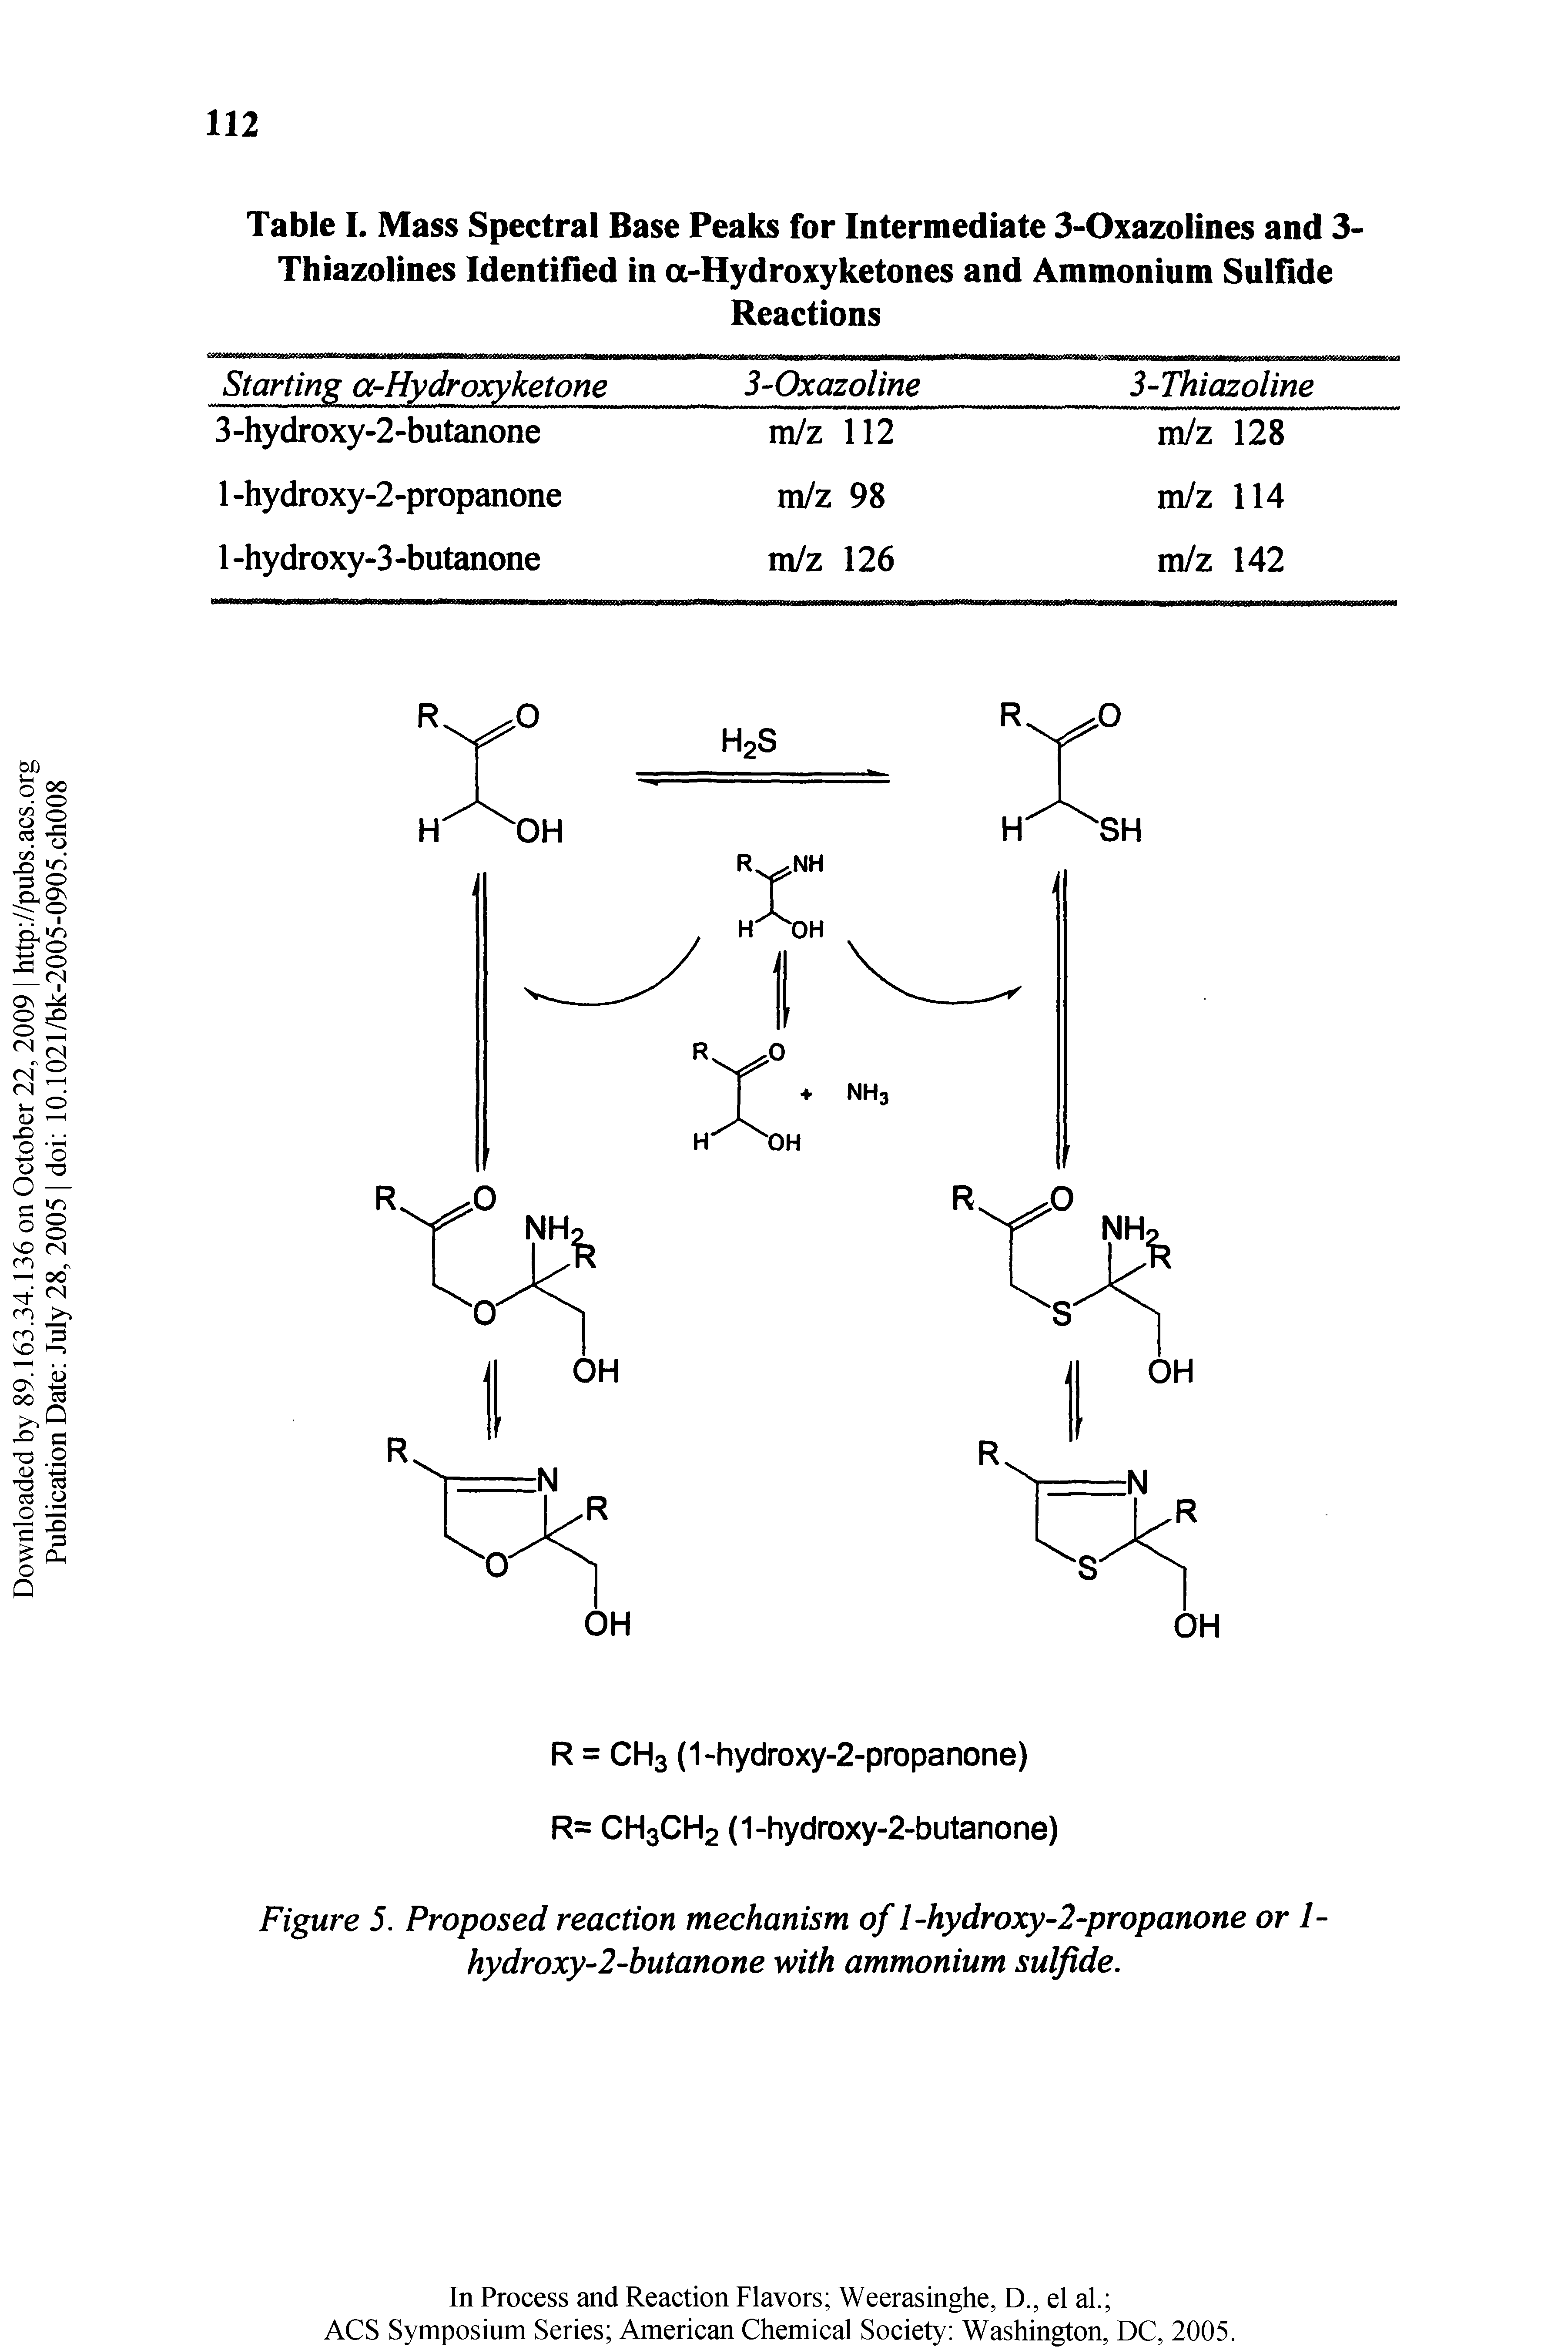 Figure 5. Proposed reaction mechanism of l-hydroxy 2-propanone or 1-hydroxy-2-butanone with ammonium sulfide.